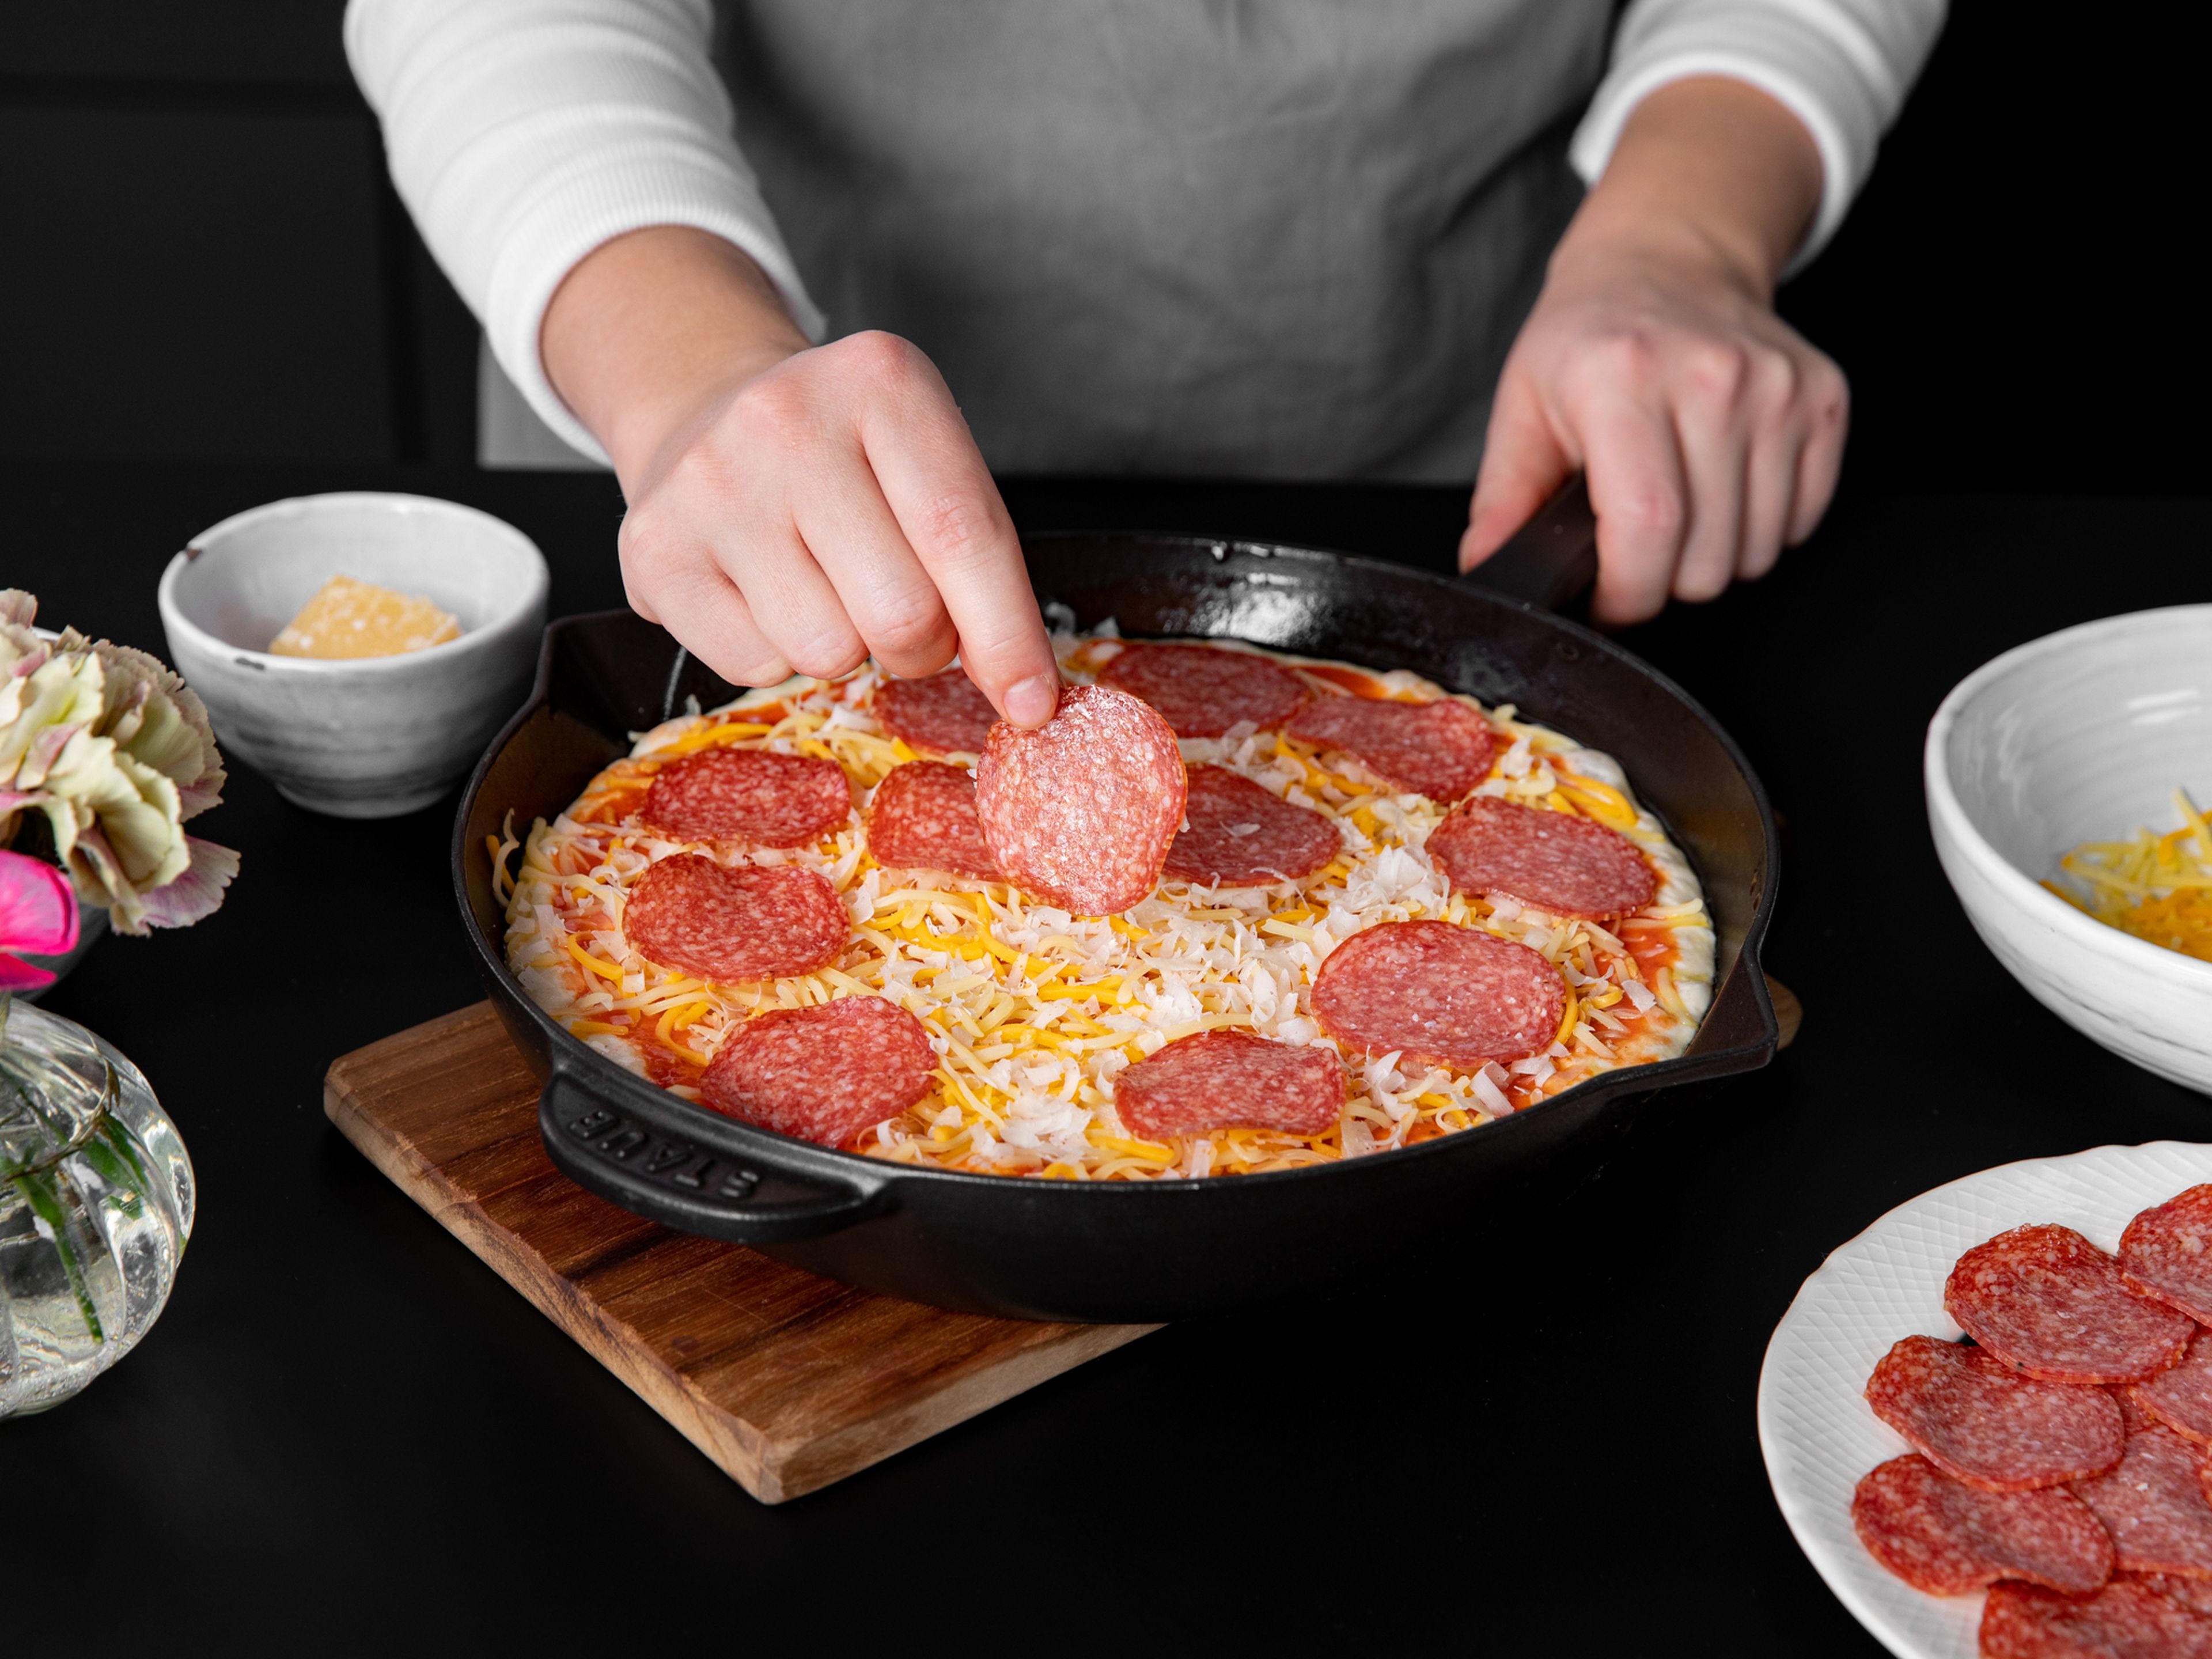 Top pizza dough with half the tomato sauce, half the cheese, and half the pepperoni. Bake in a preheated oven at 250°C/475°F for approx. 10 min. Remove from the oven and serve immediately. Repeat the process to use up remaining dough and toppings. Enjoy!